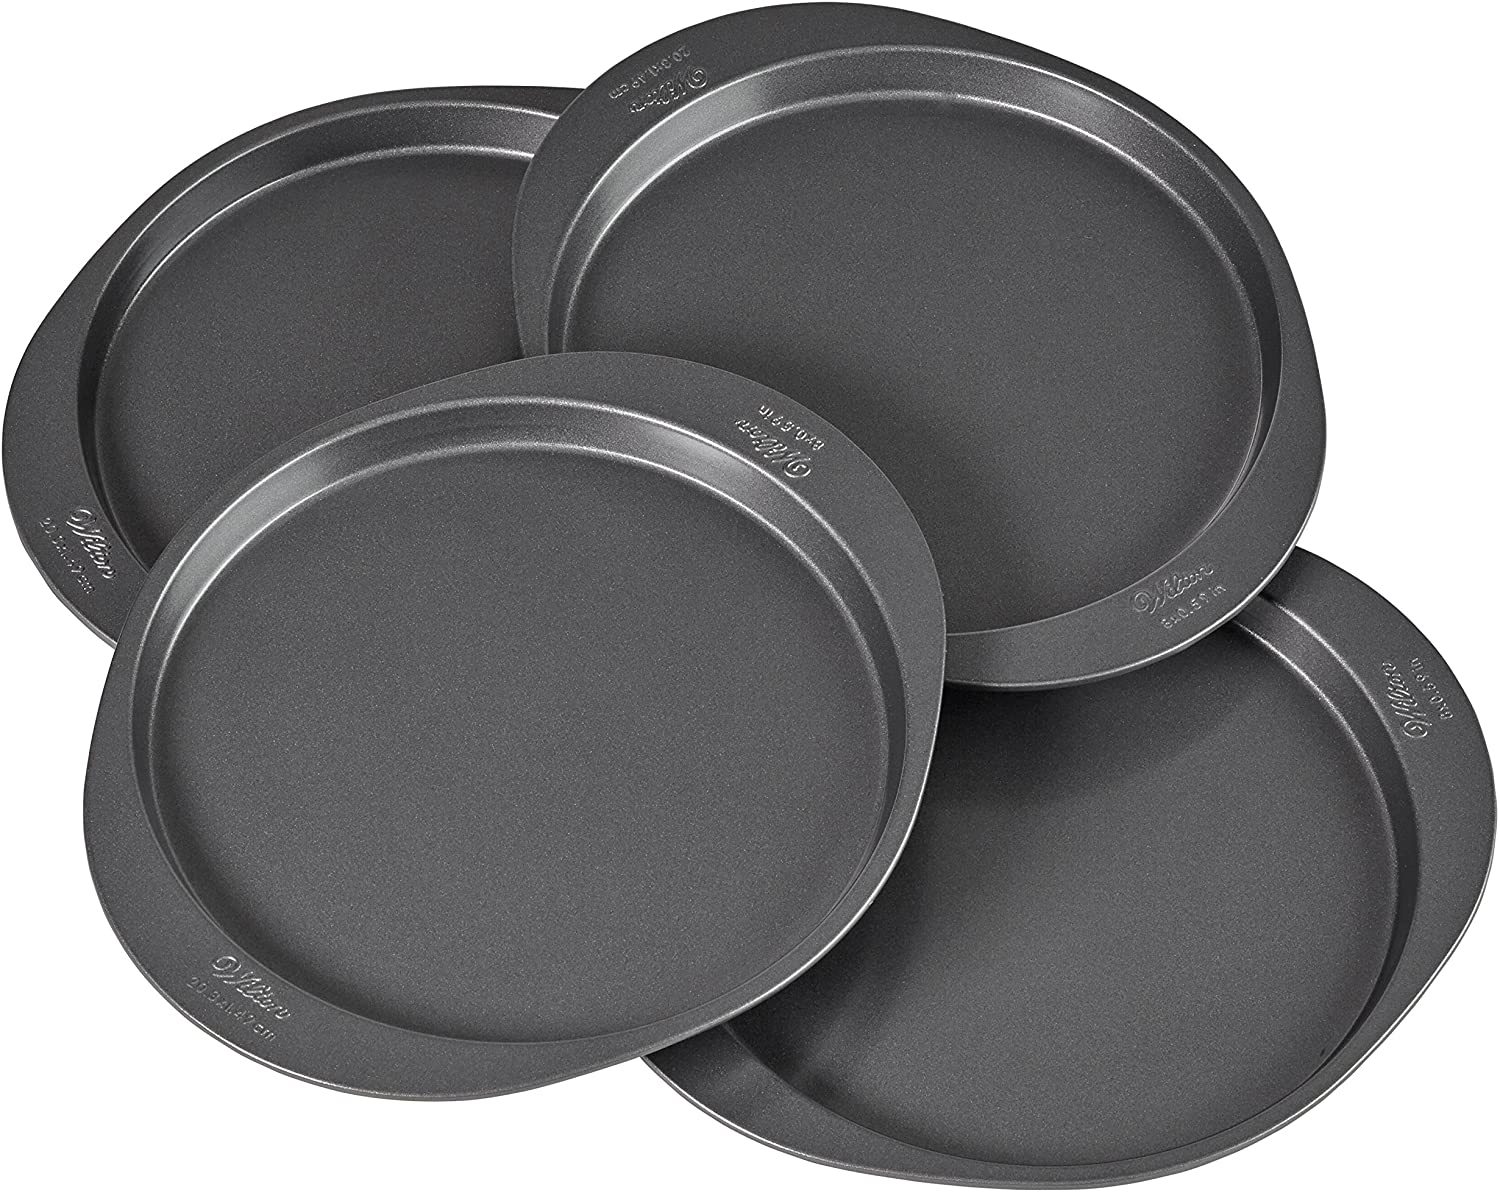 Top 10 Best Baking Pans for Cakes you can buy on amazon